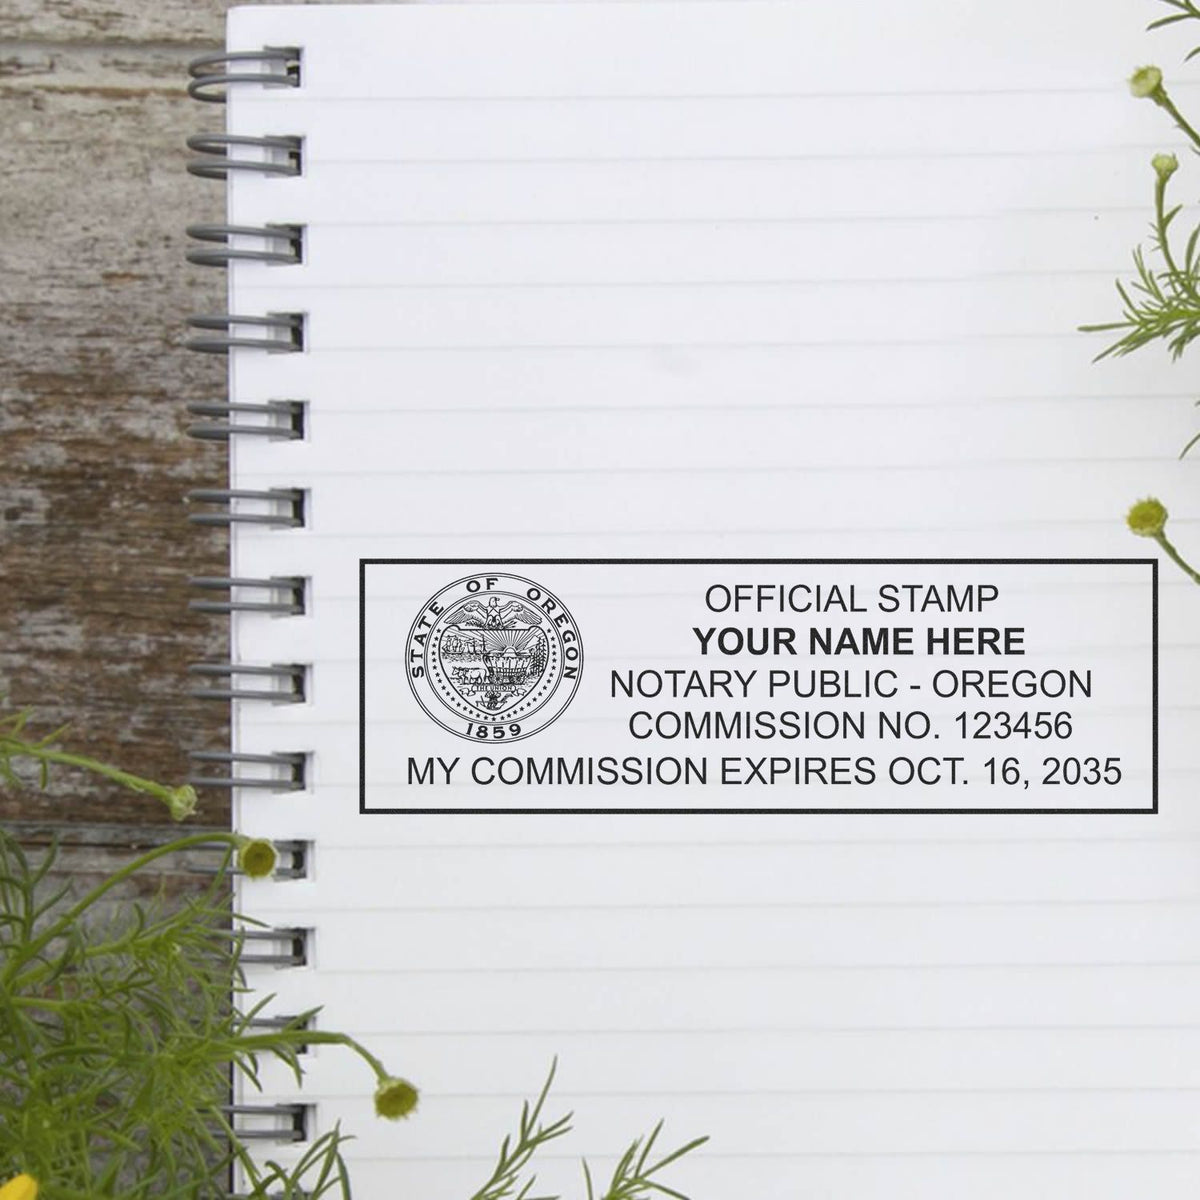 The Slim Pre-Inked Rectangular Notary Stamp for Oregon stamp impression comes to life with a crisp, detailed photo on paper - showcasing true professional quality.